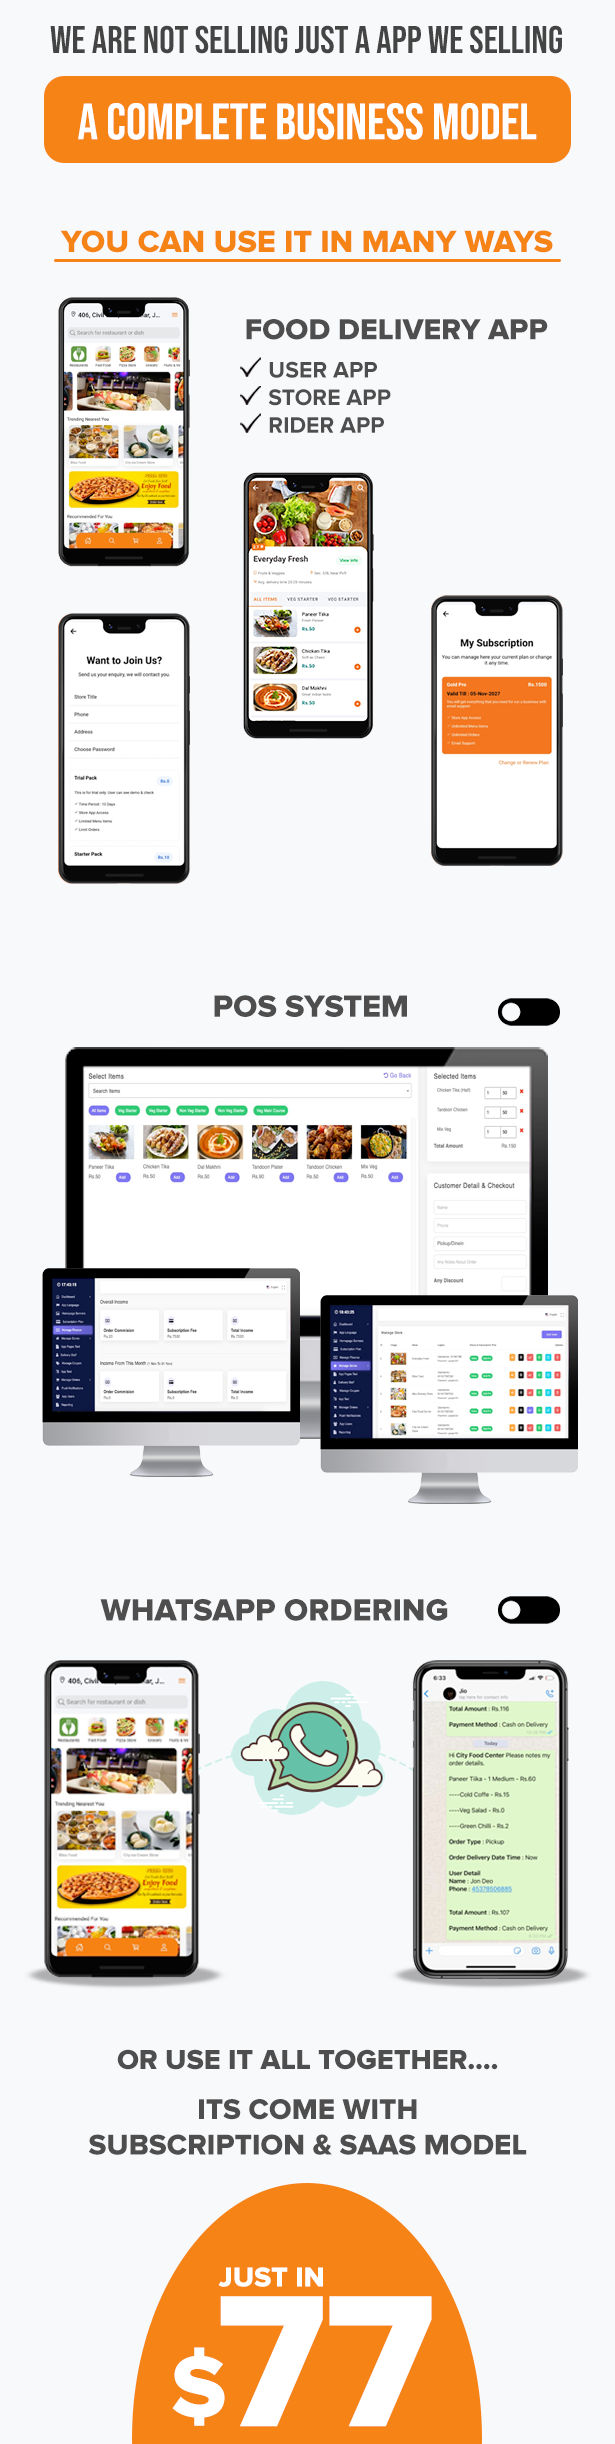 Food Delivery App + POS System + WhatsApp Ordering - Complete SaaS Solution (ionic 5 & Laravel) - 4